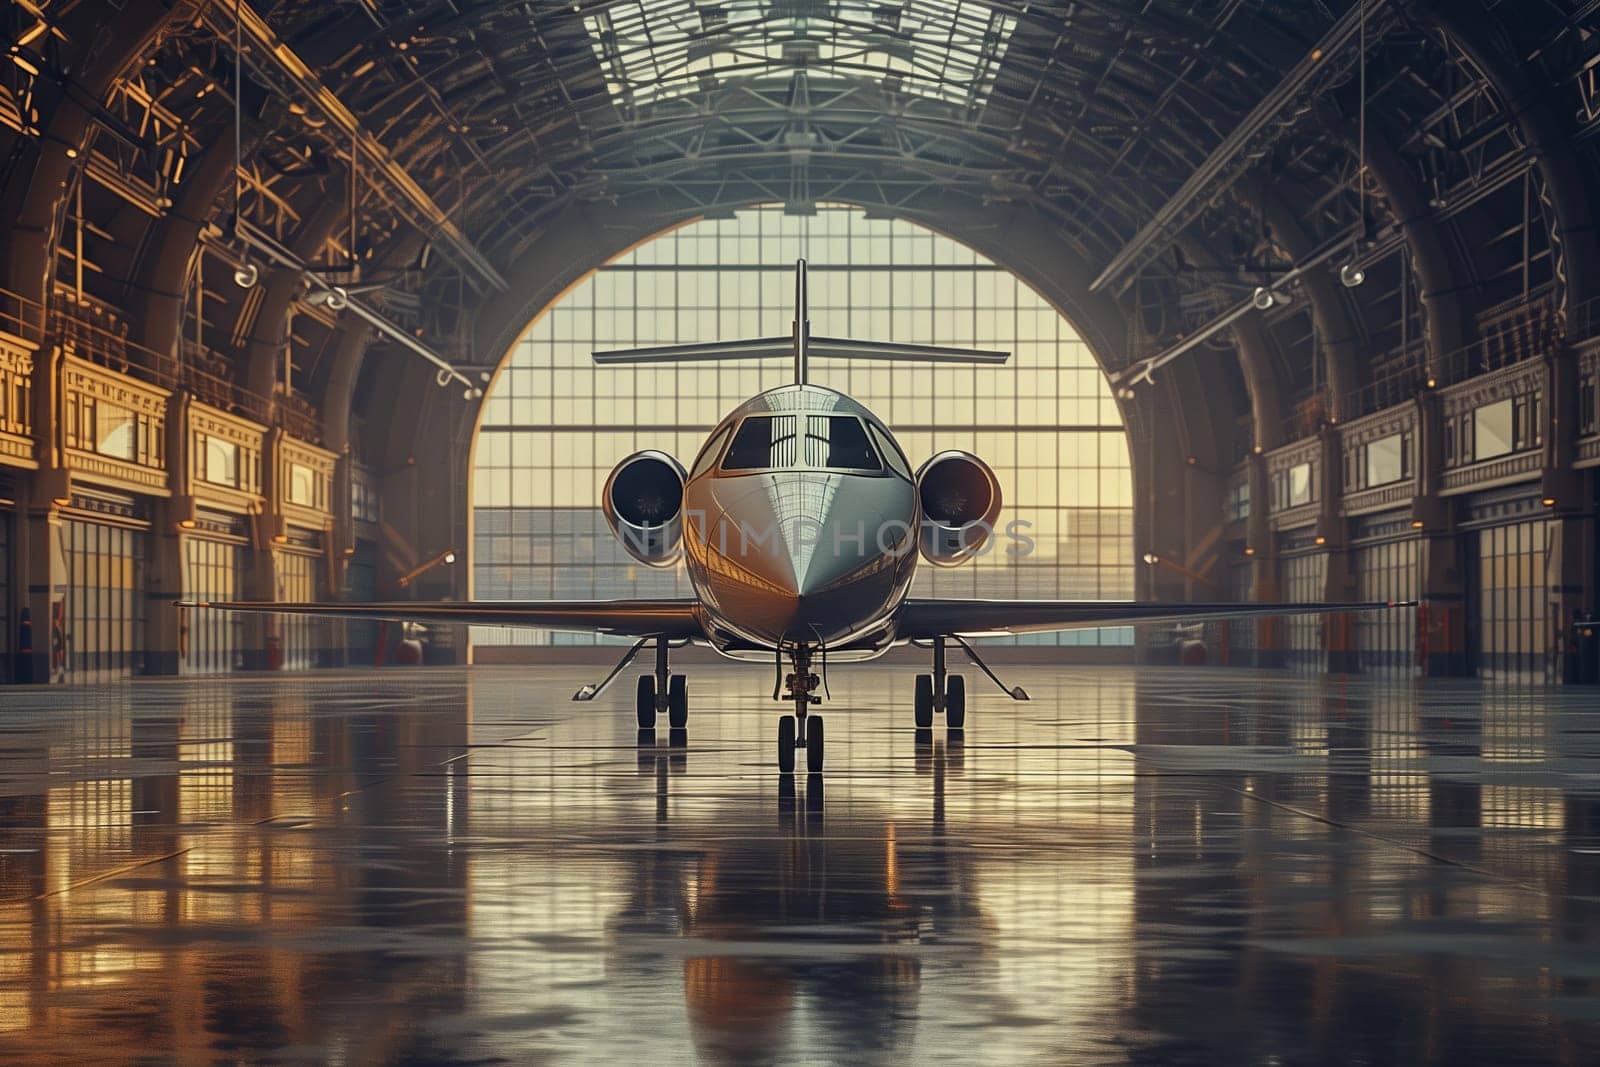 A private aircraft is stored in an aerospace hangar by richwolf